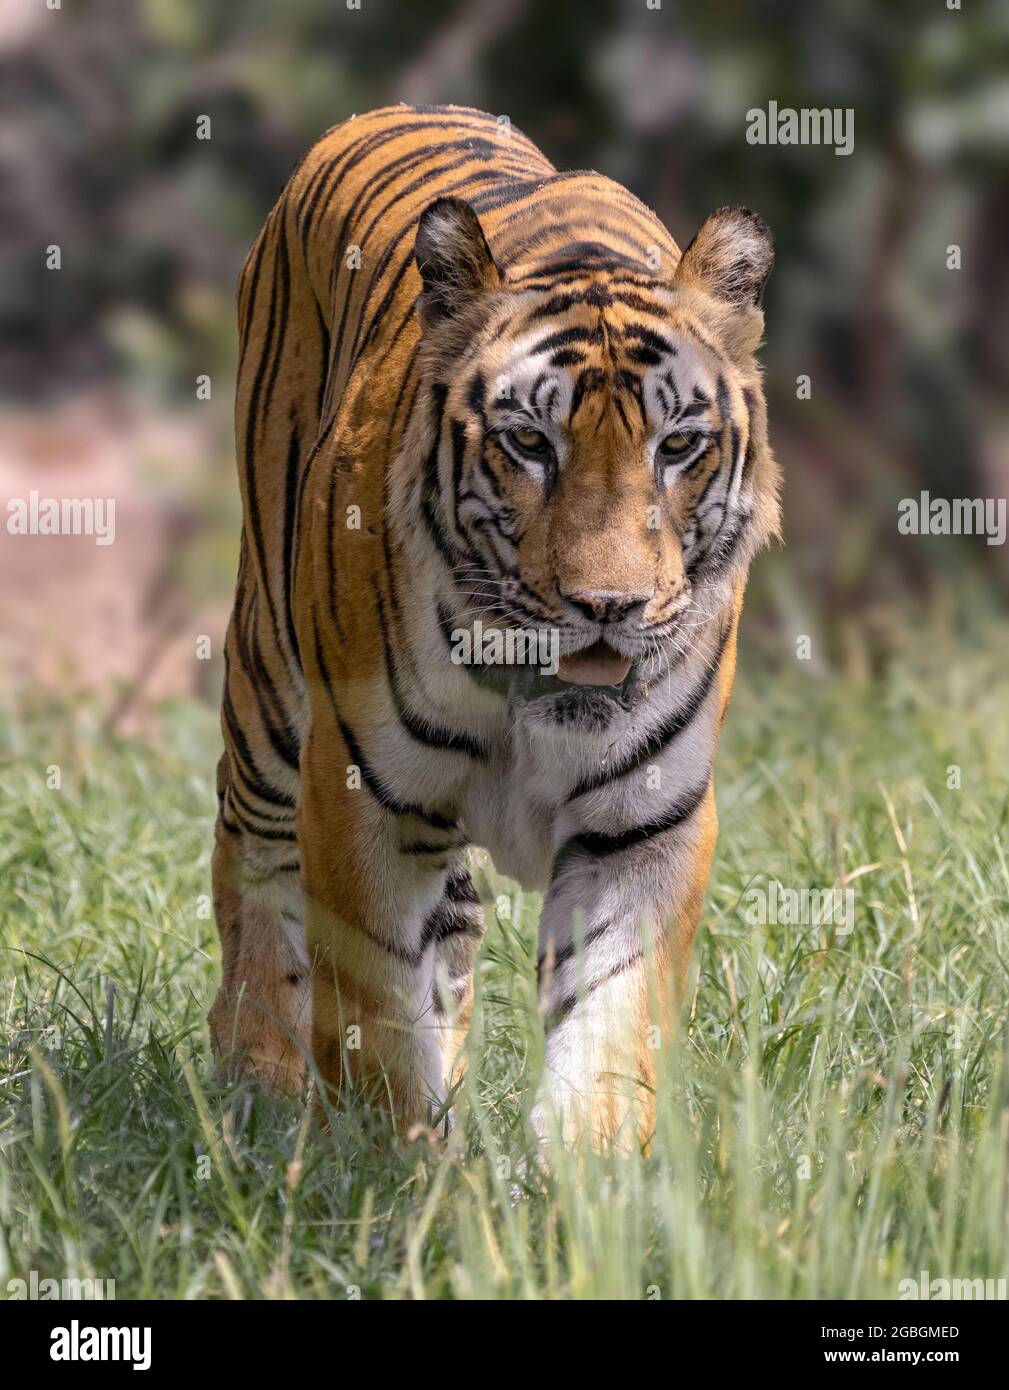 Great tiger male in the nature habitat. Wildlife scene with danger animal. Hot summer in India. Dry area with beautiful indian tiger, Panthera tigris. Stock Photo